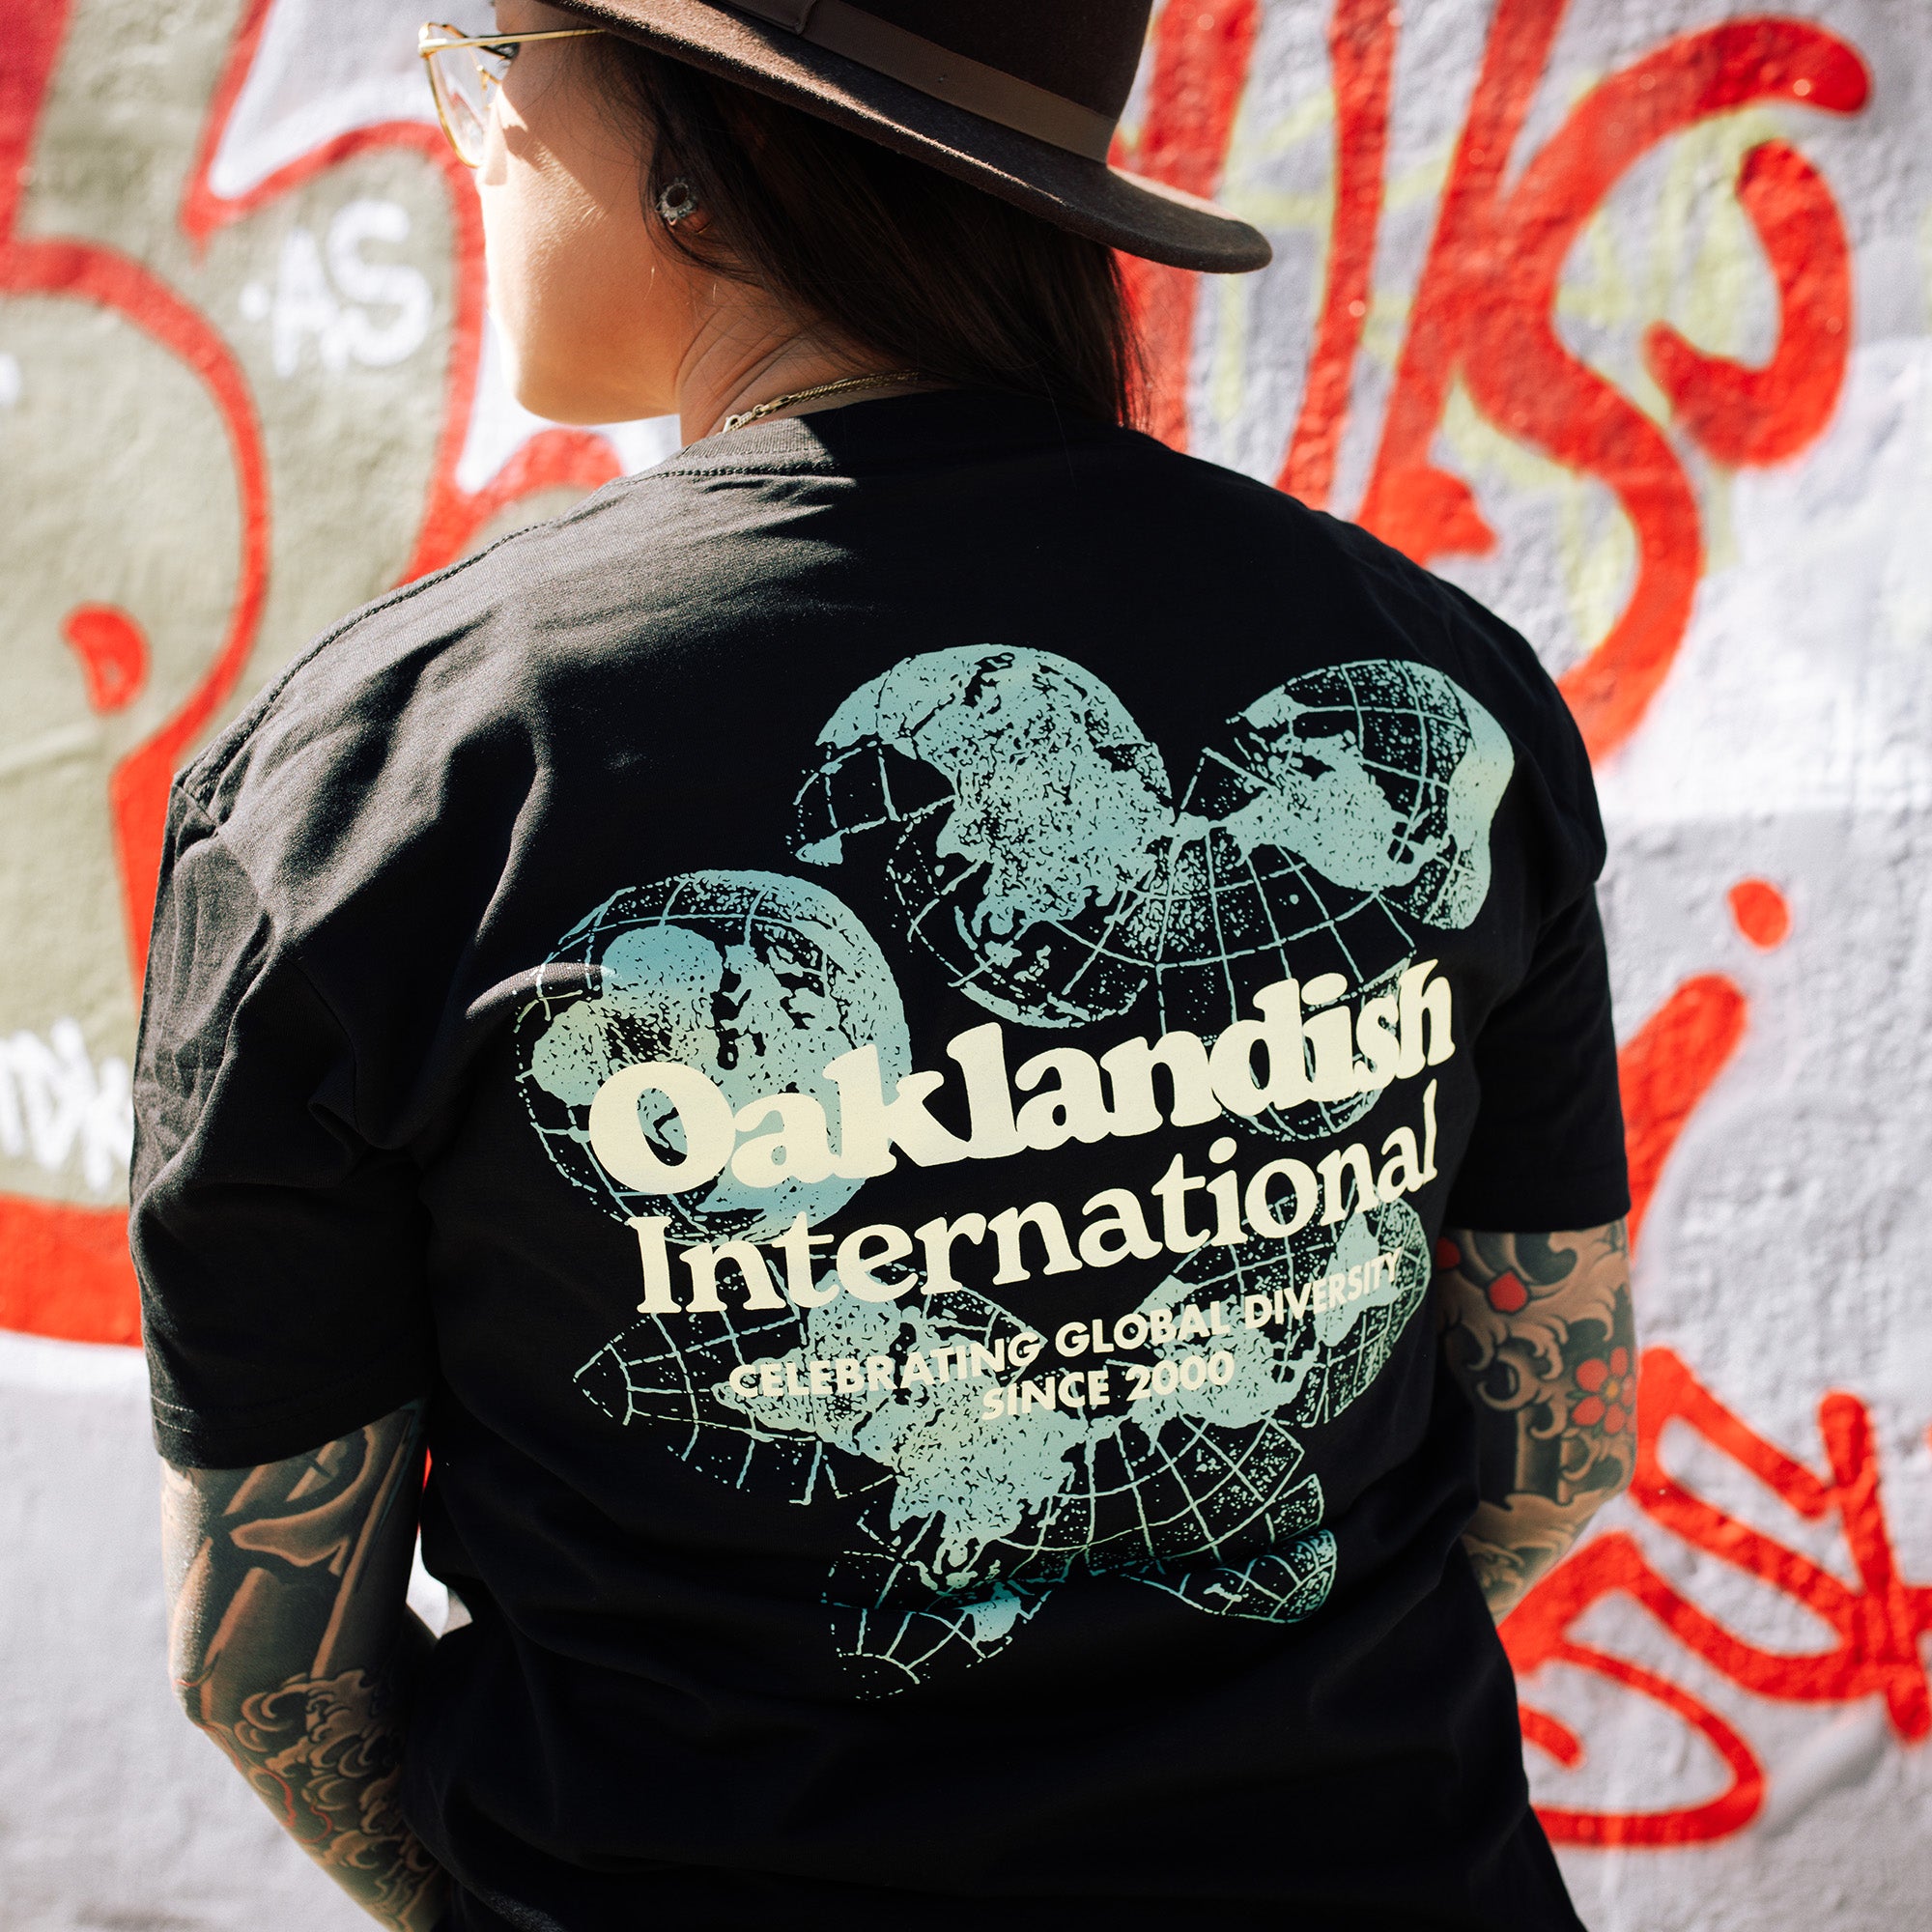 Female model showing off backside of a black t-shirt featuring a green and yellow Oakland International graphic with a caption celebrating global diversity since 2000.